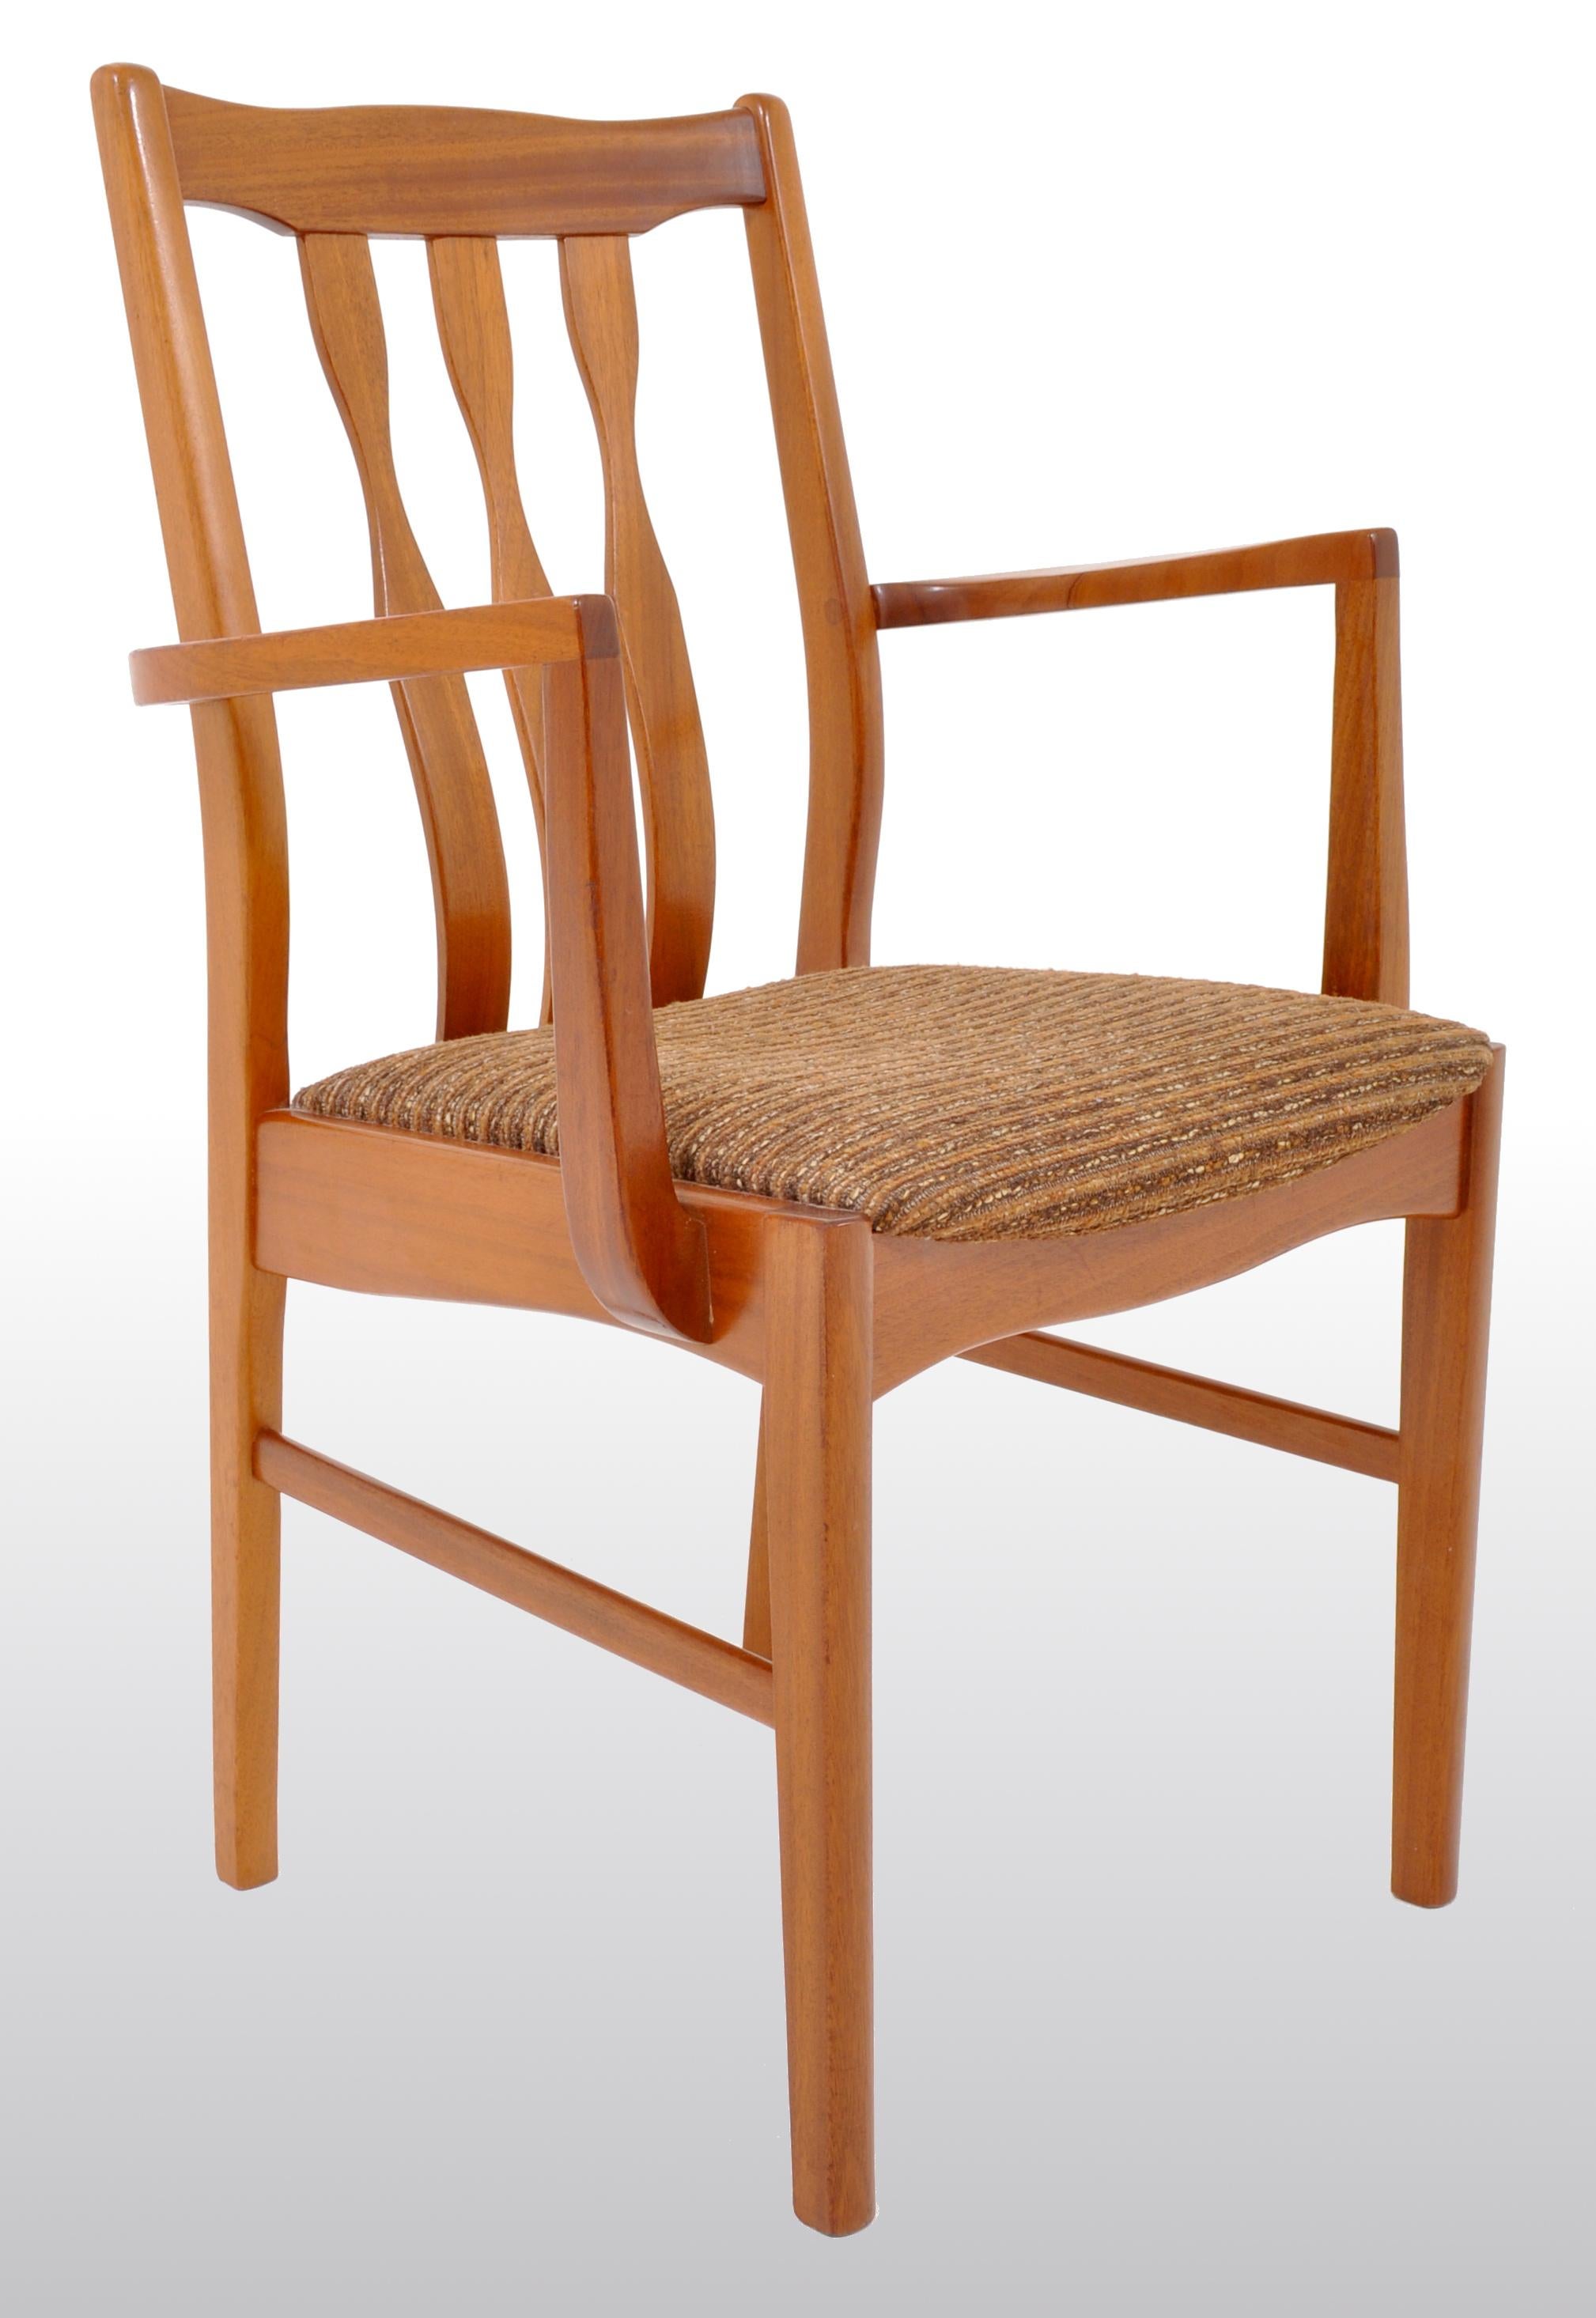 Pair of Mid-Century Modern Captain's/Armchairs in Teak, 1960s For Sale 2